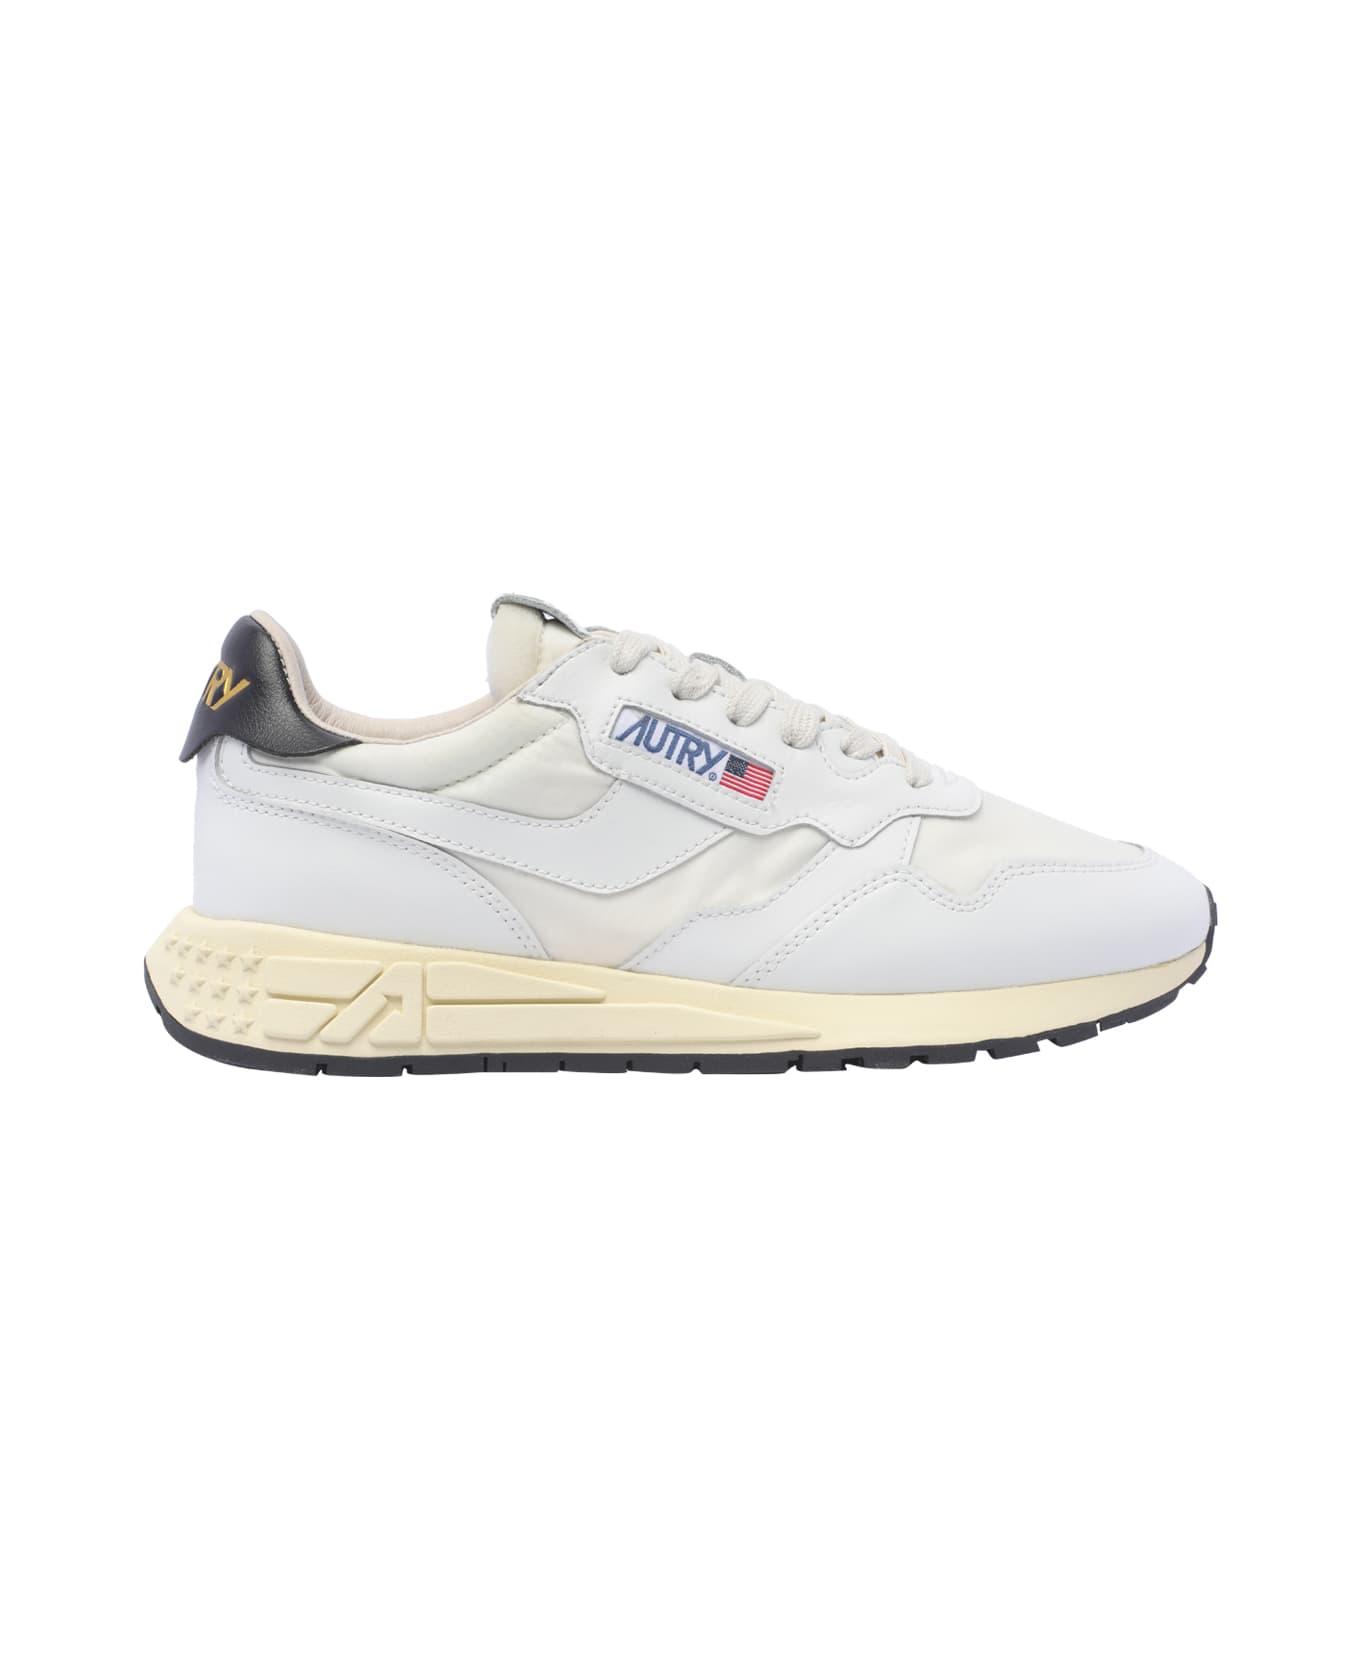 Autry Reelwind Sneakers - White/white